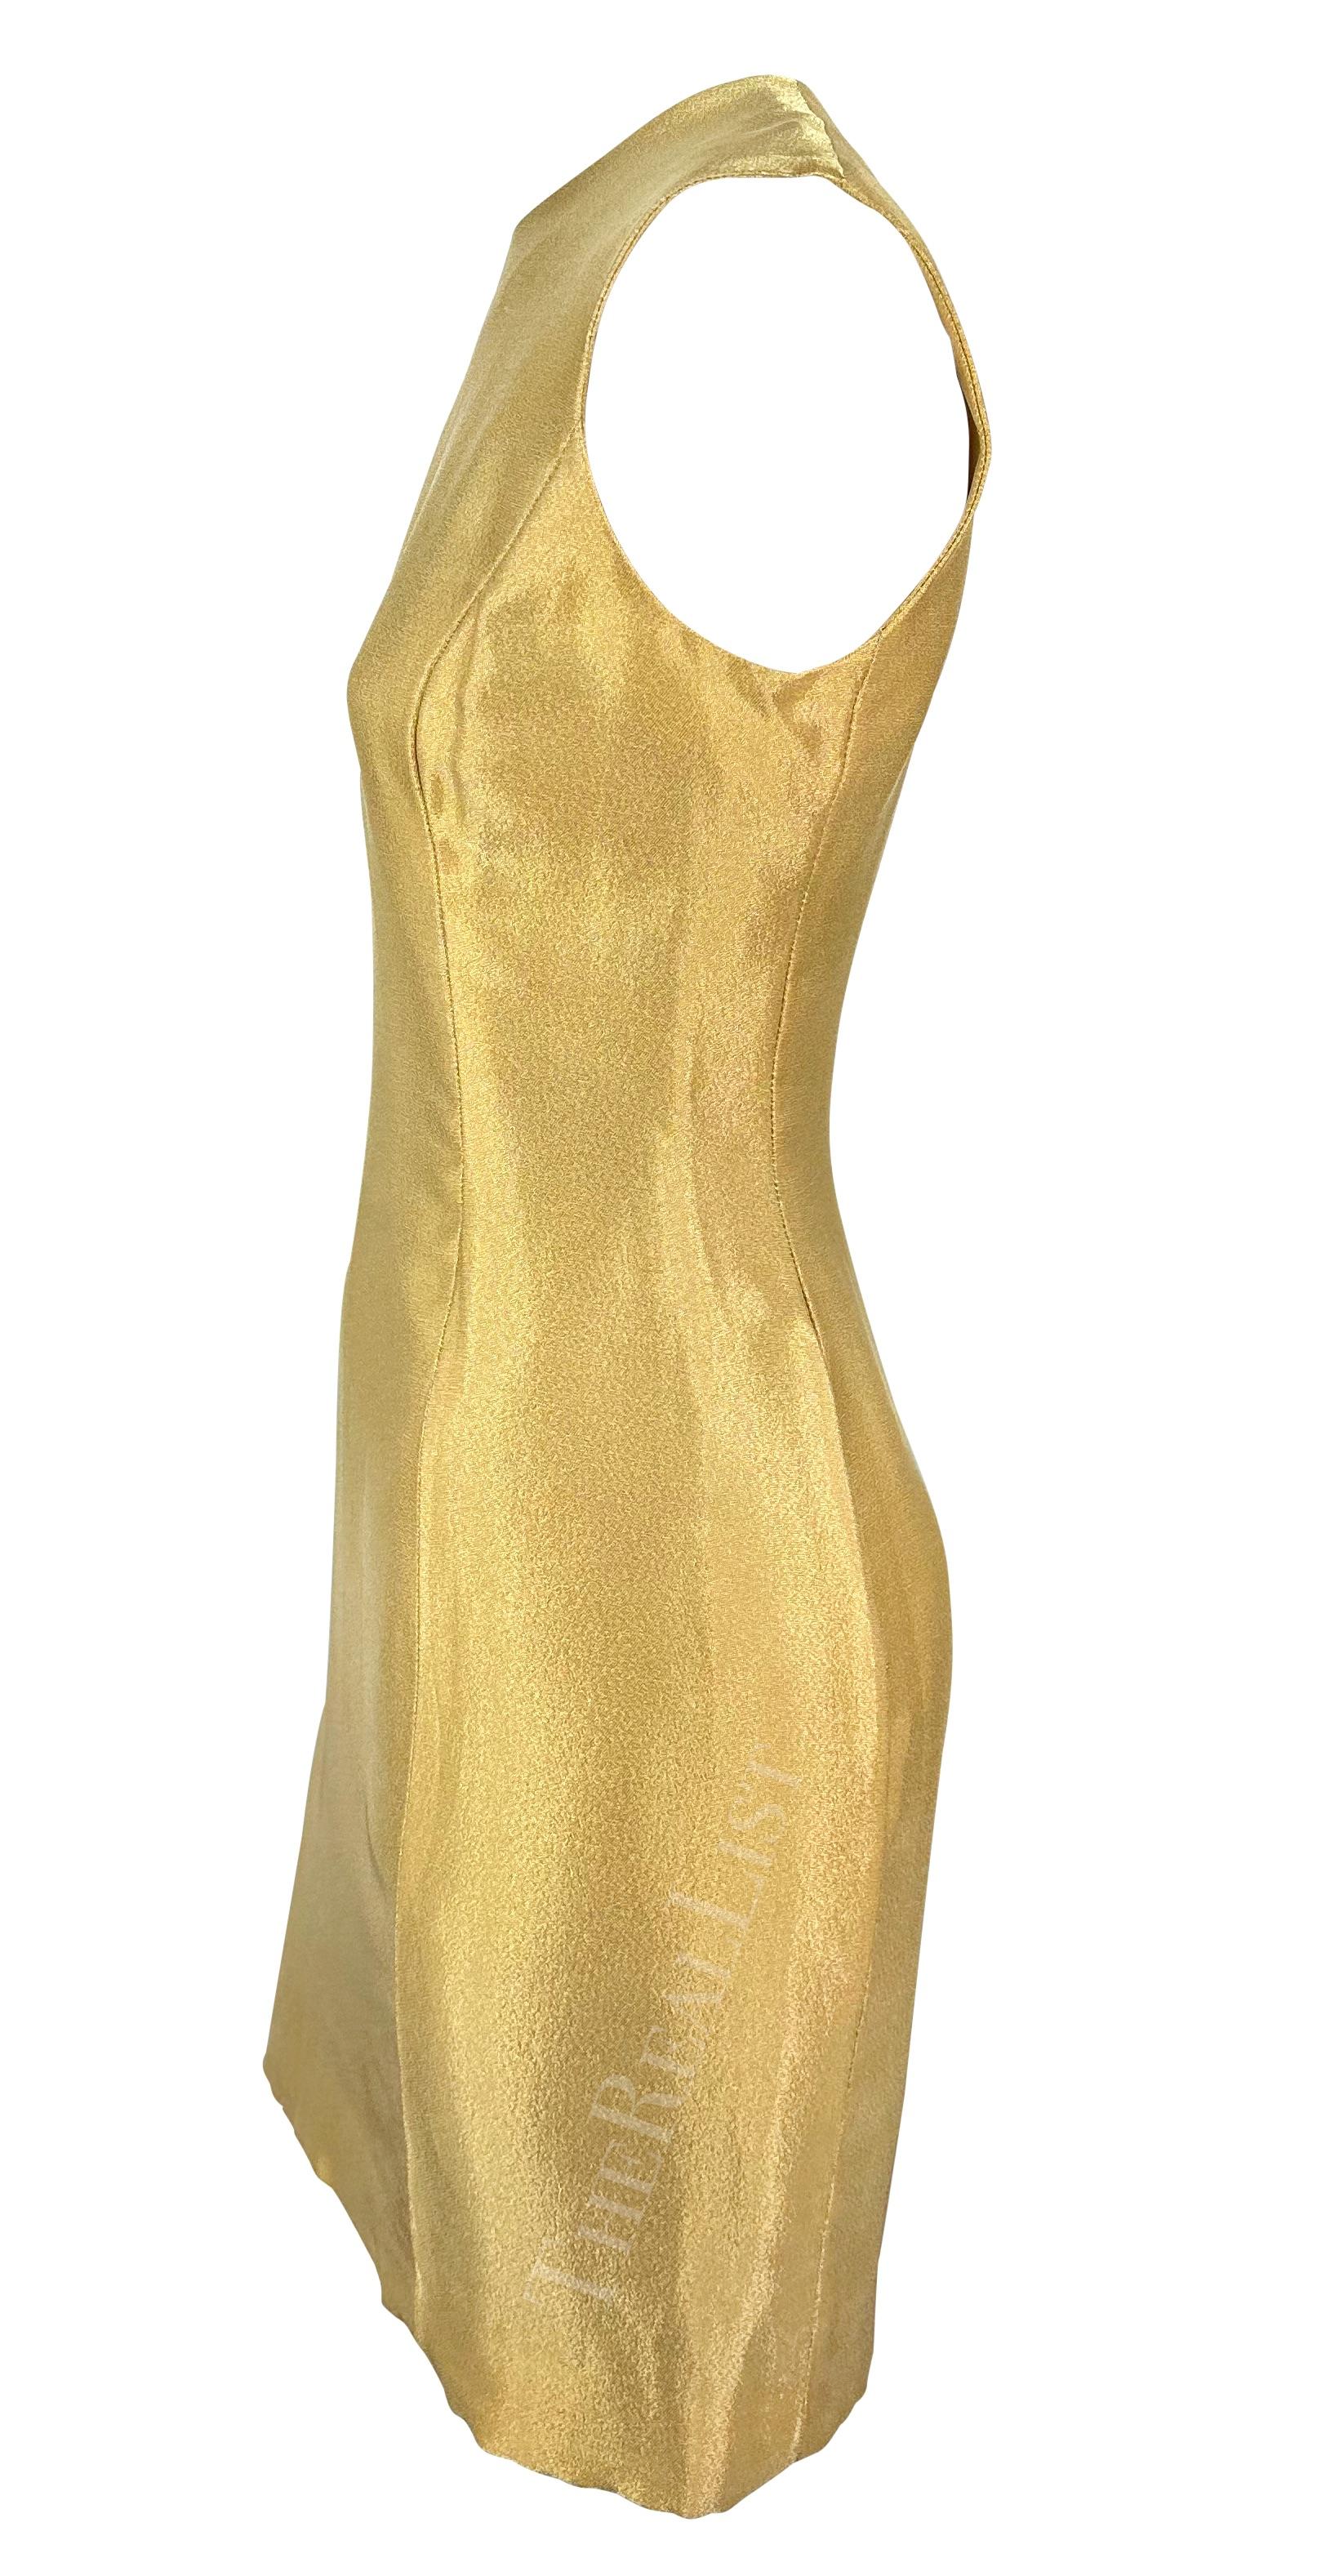 F/W 1994 Gianni Versace Couture Gold Metallic Sleeveless Mini Dress In Excellent Condition For Sale In West Hollywood, CA